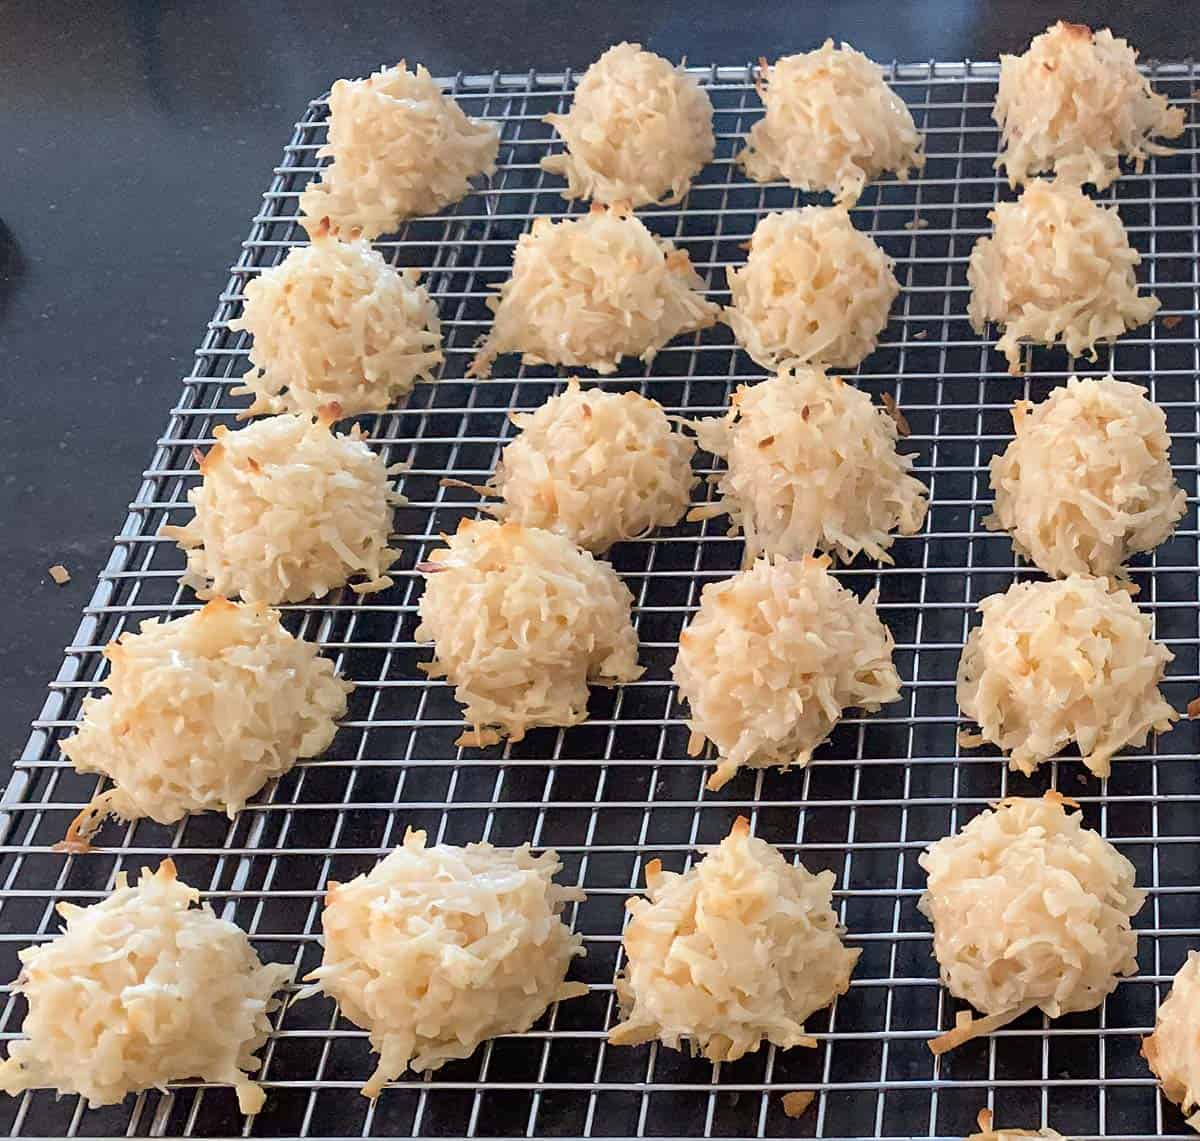 Coconut macaroons baked and cooling on a wire rack.